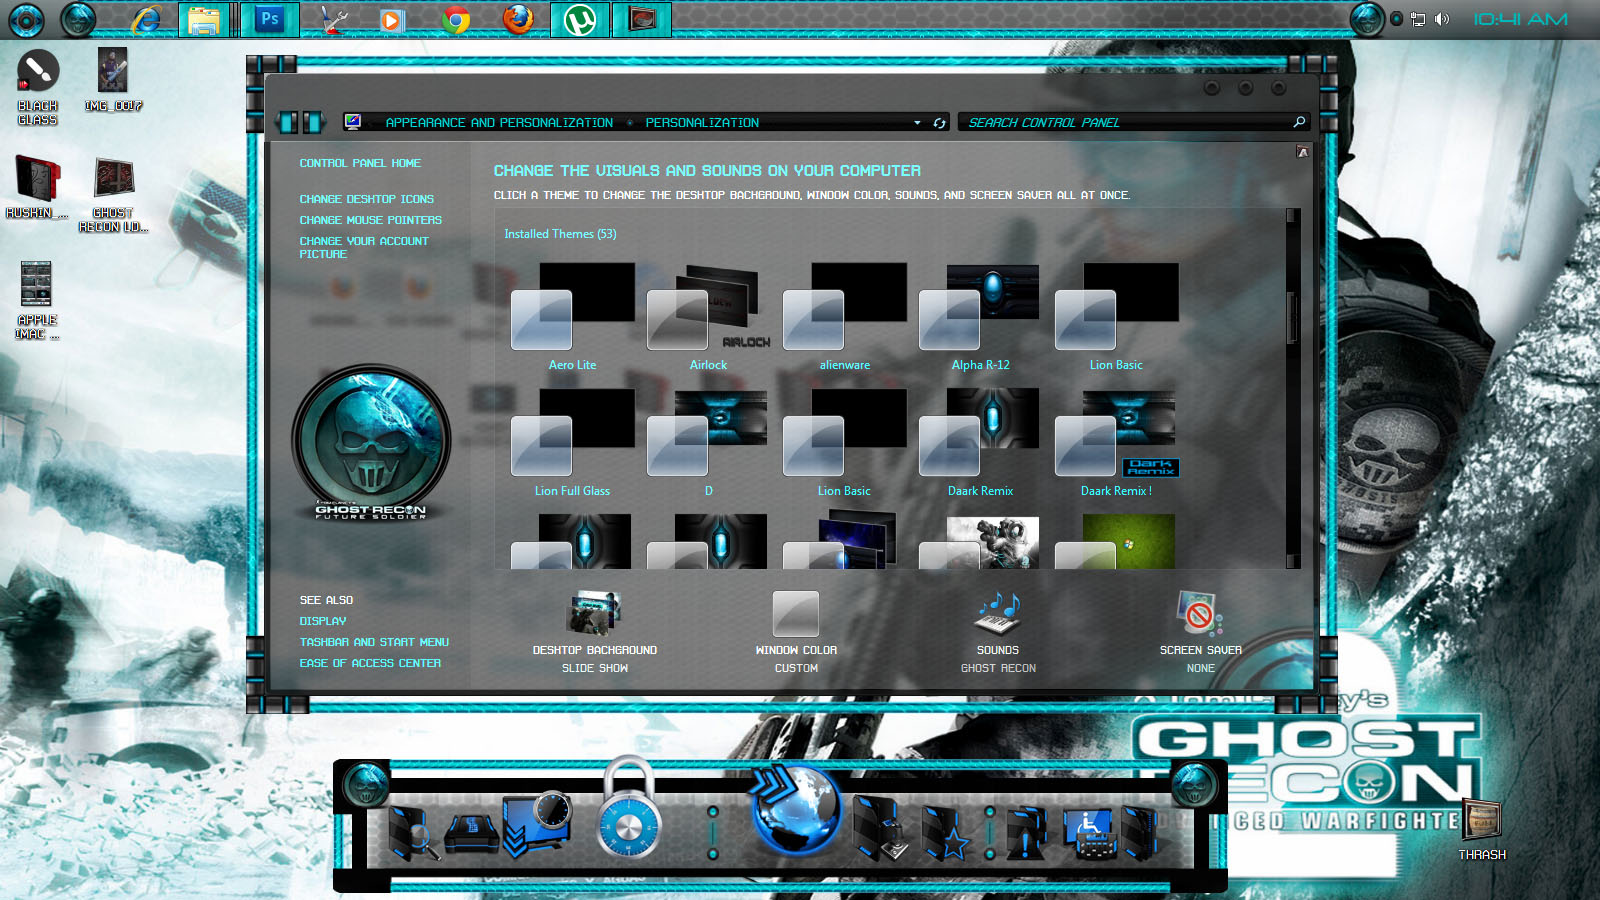 .: Ghost Recon Dock:.